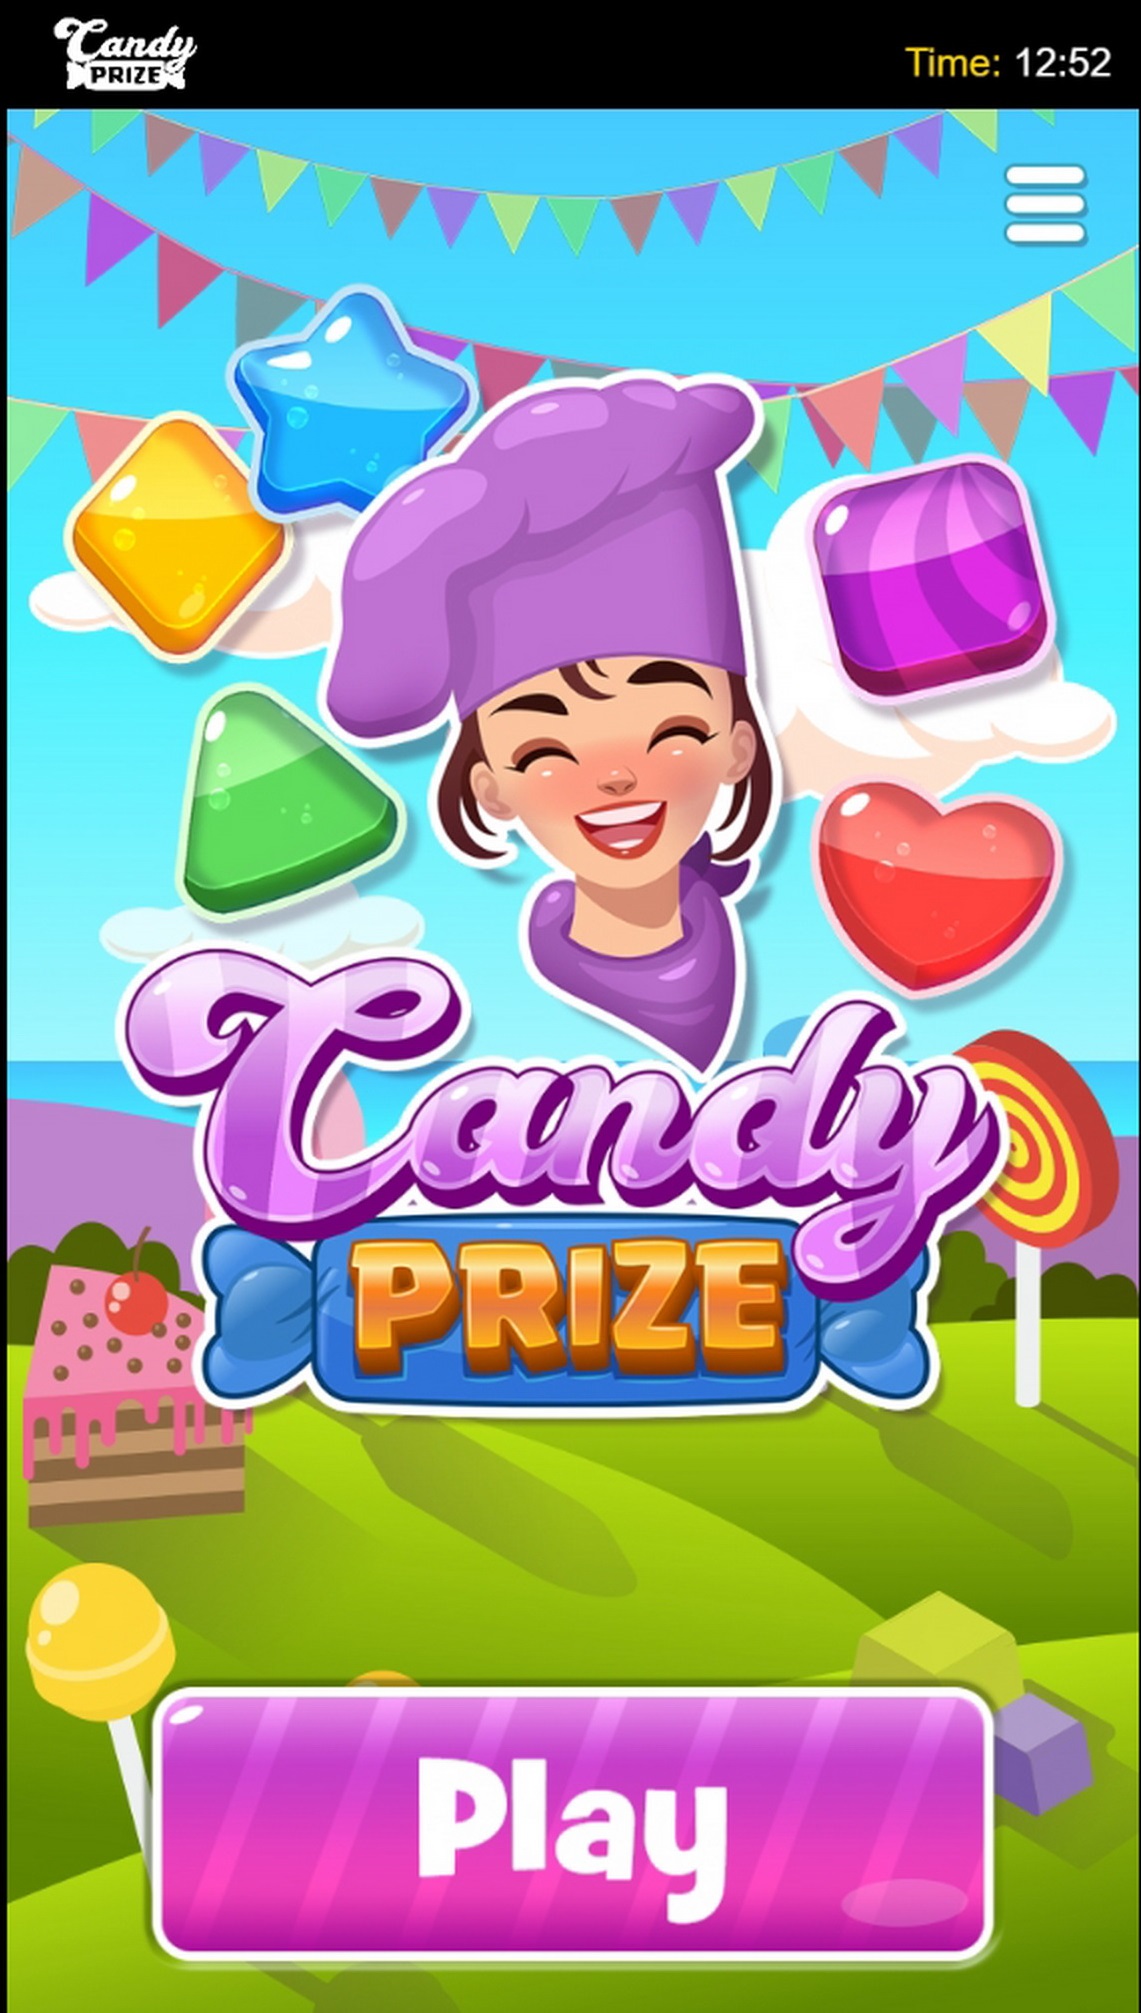 Play Candy Prize Free Casino Slot Game by Green Jade Games